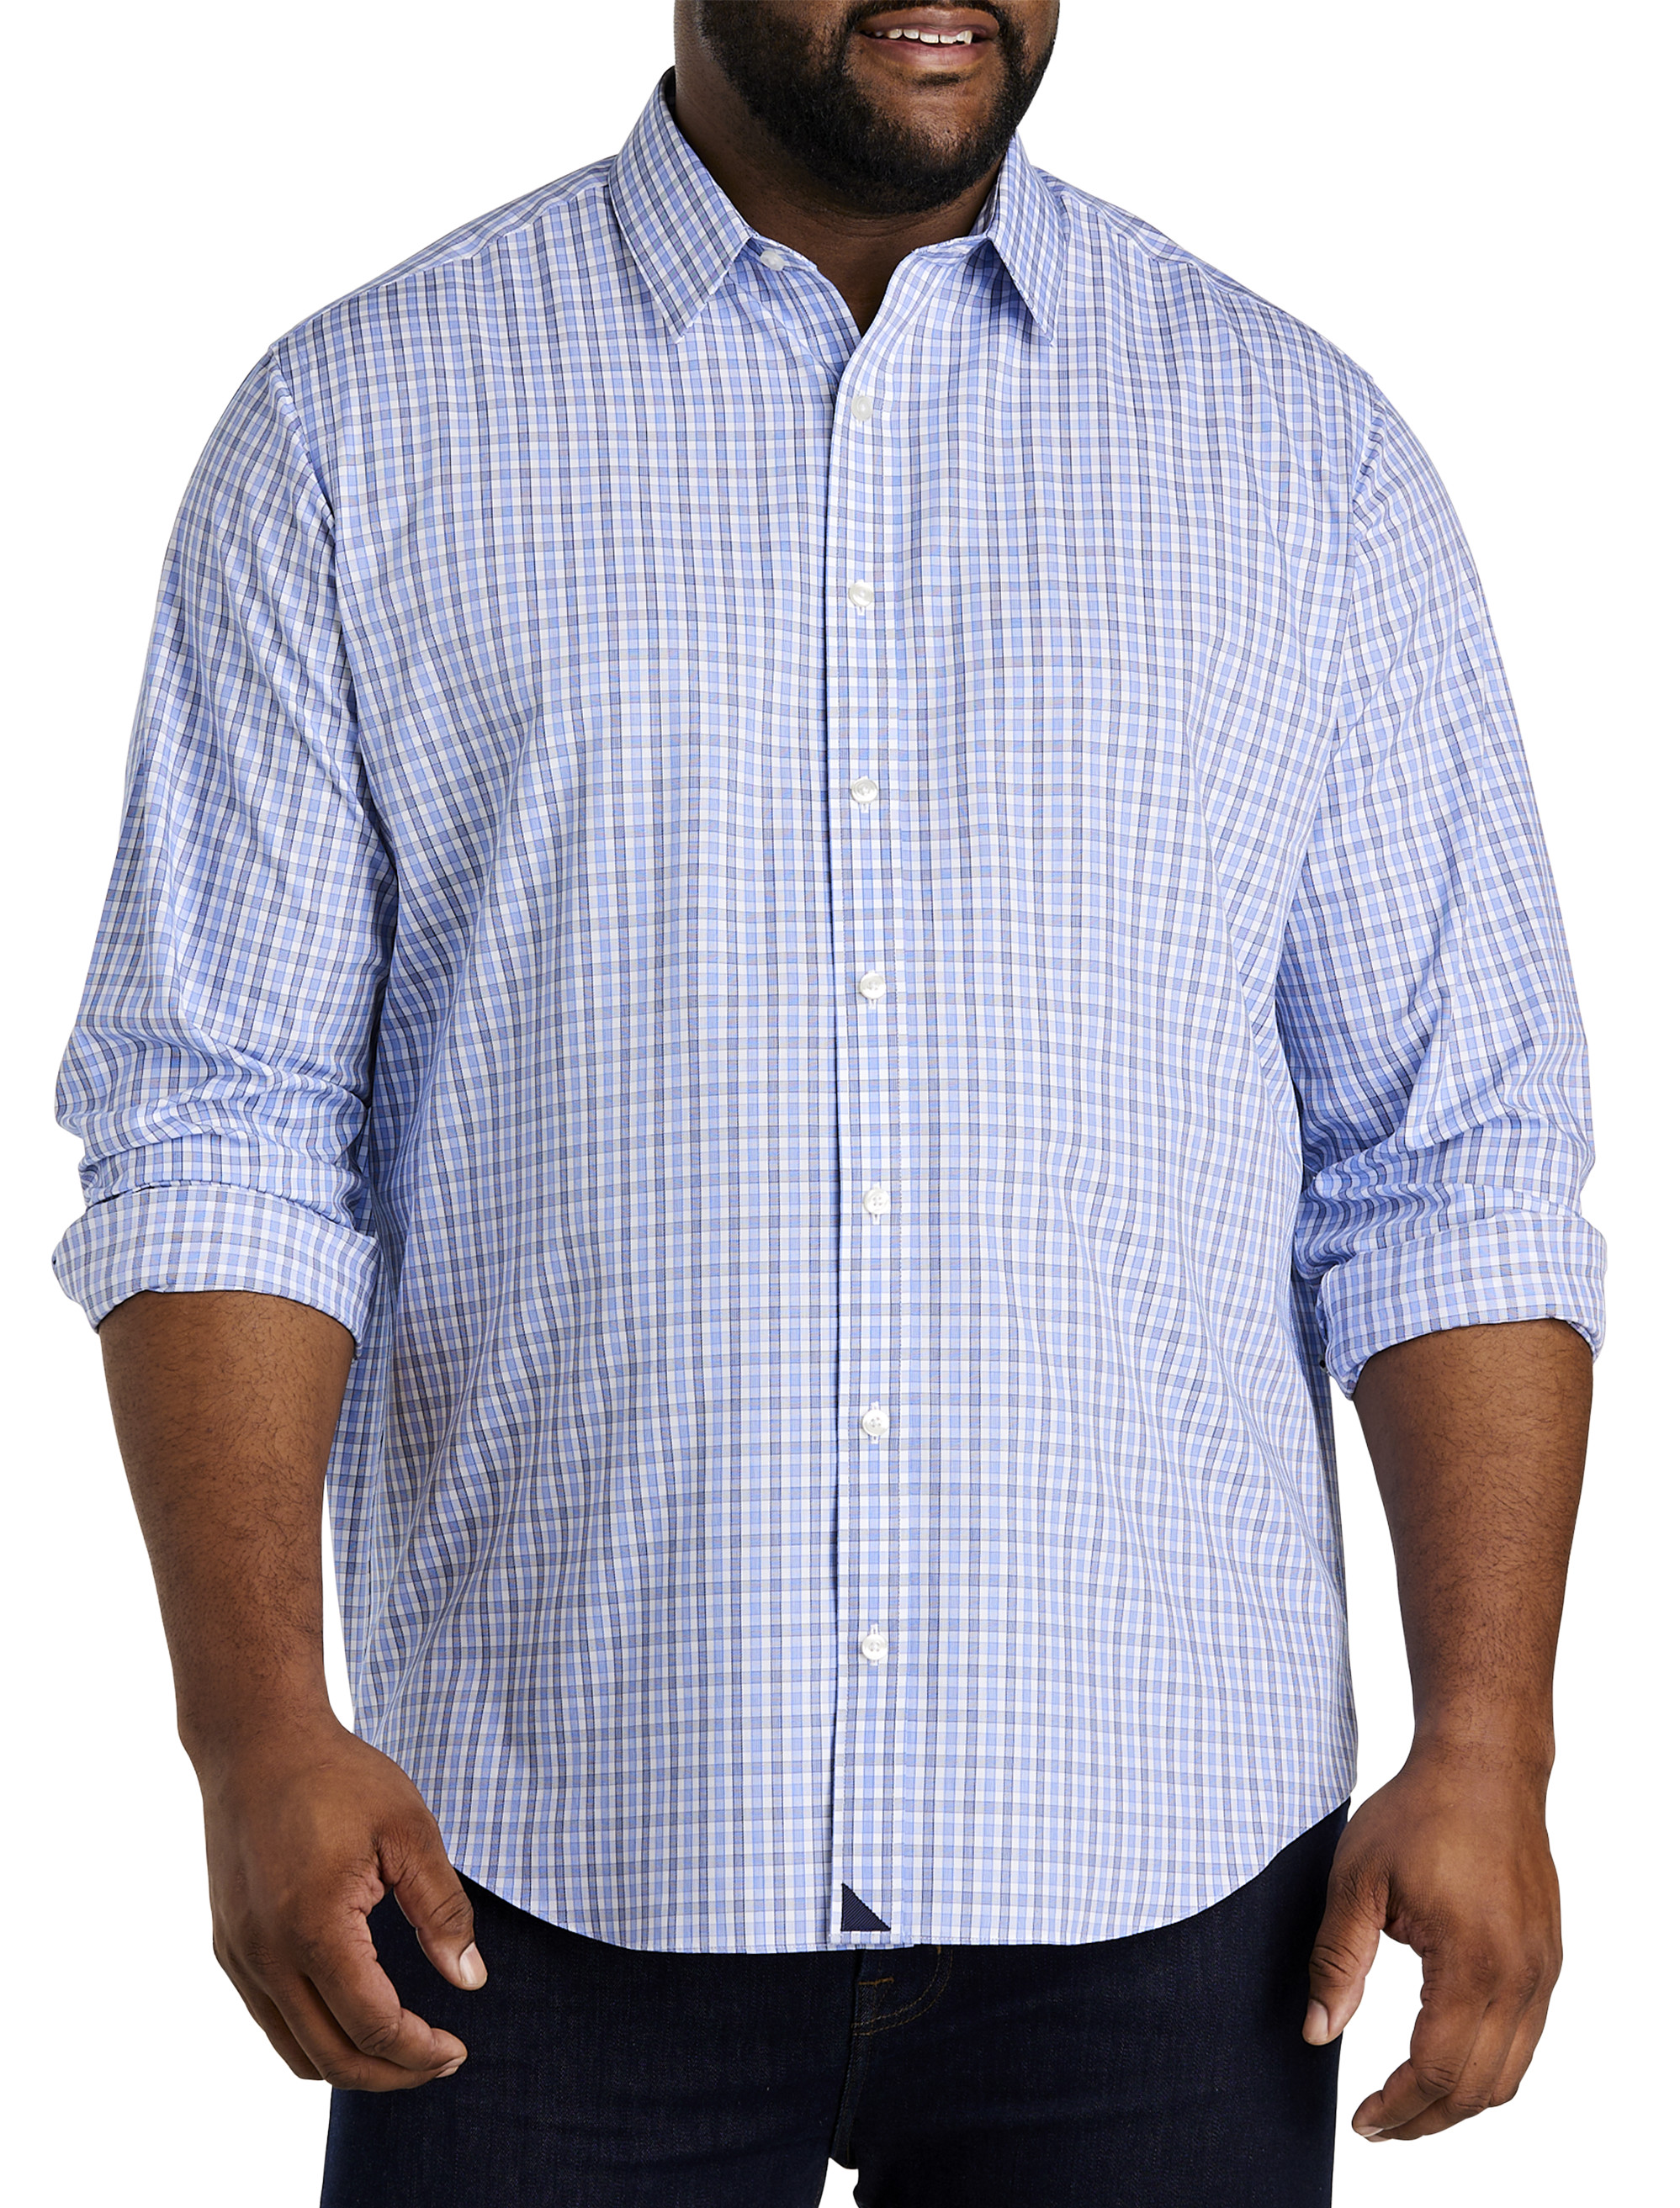 Durif Check-Patterned Sport Shirt